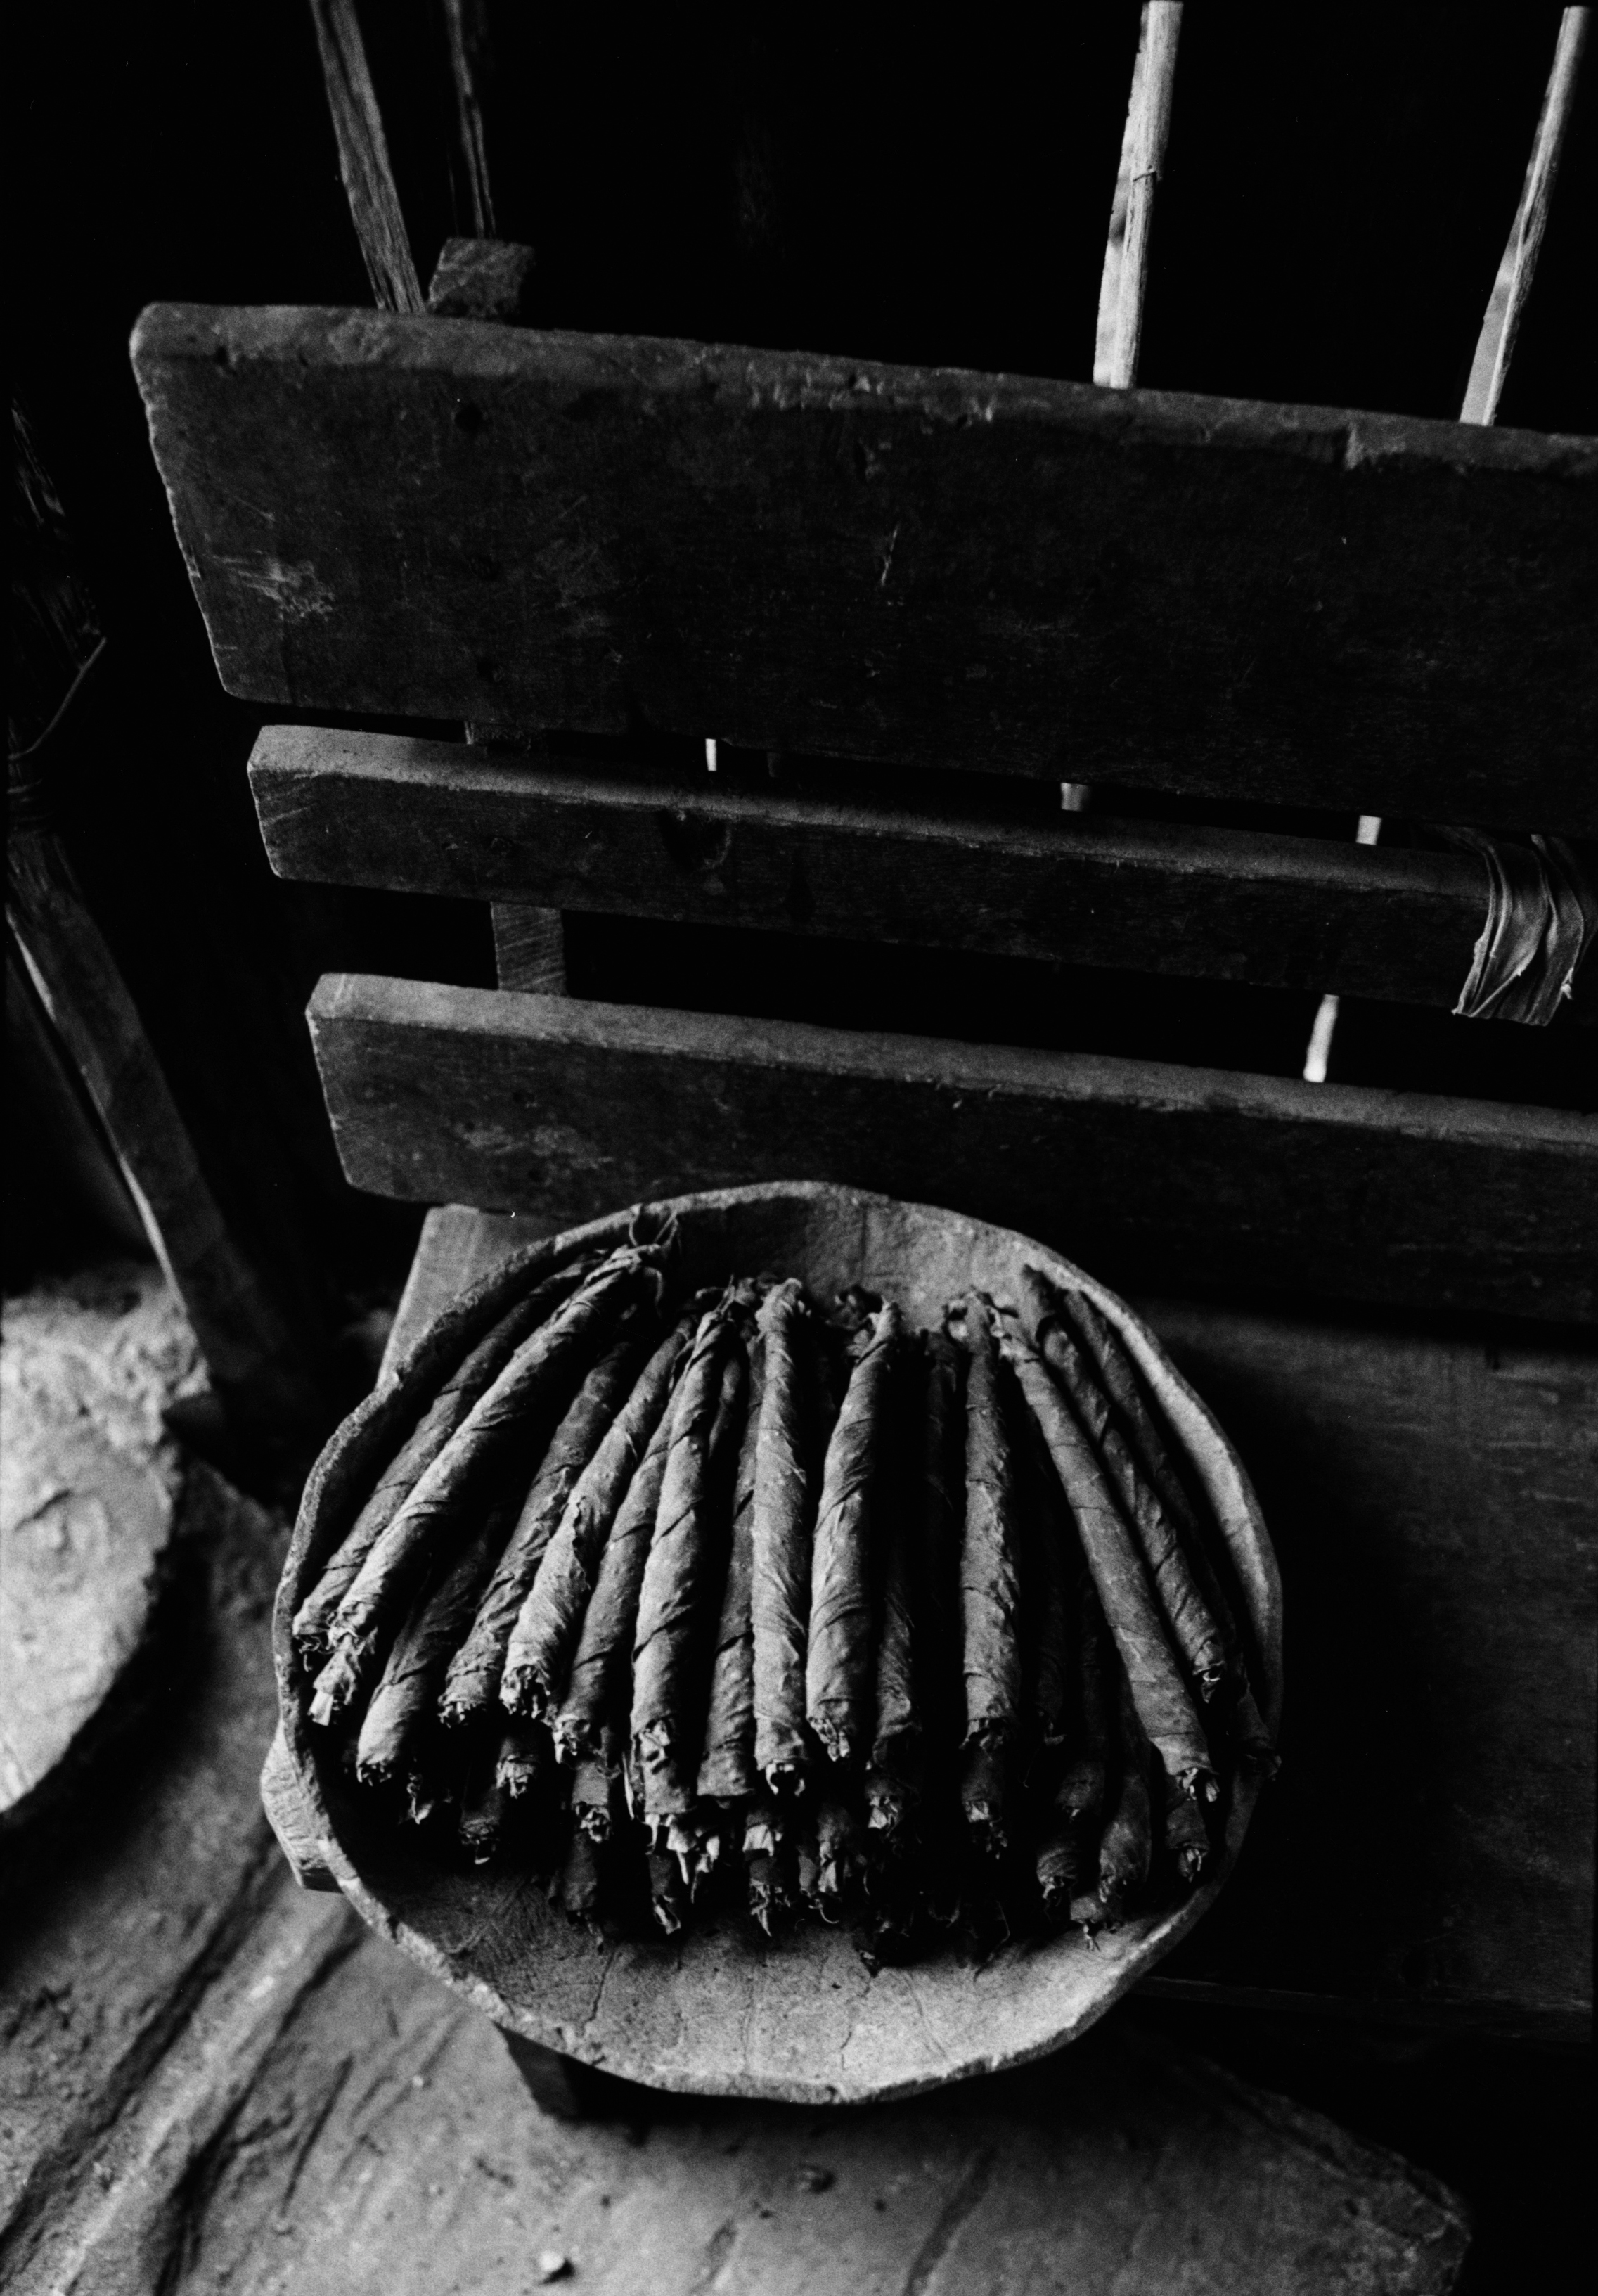  Freshly rolled cigars known as Hach-Kutz in Mayan.  